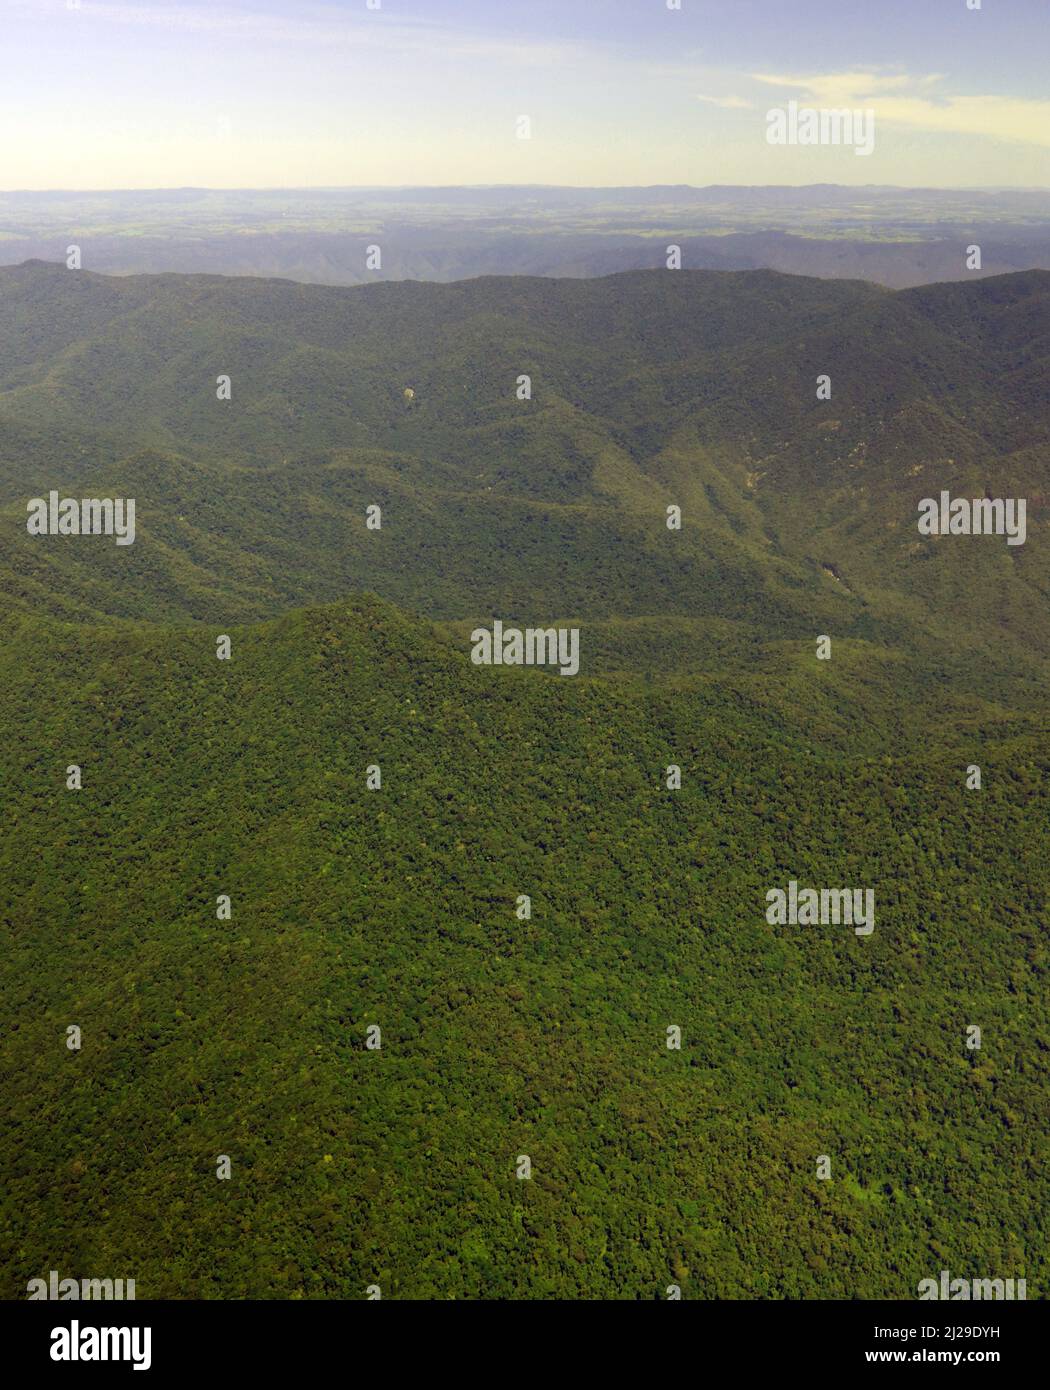 Aerial view of Wet Tropics World Heritage rainforests on the slopes of Bellenden Ker, near Cairns, Queensland, Australia Stock Photo